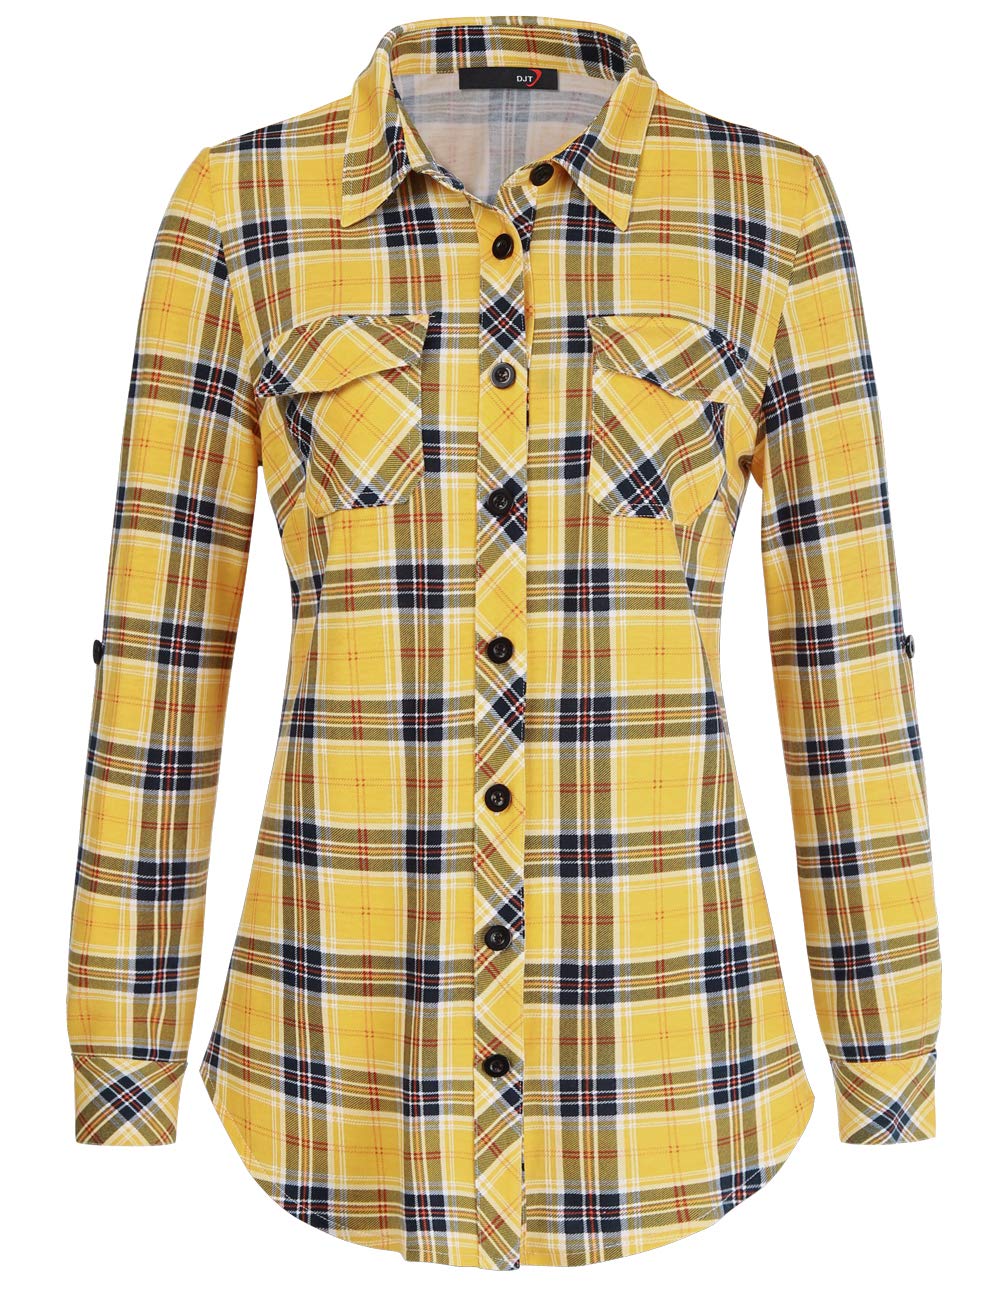 DJT Roll Up Long Sleeve Pocket Yellow Plaid Women’s Collared Button Down Plaid Shirt